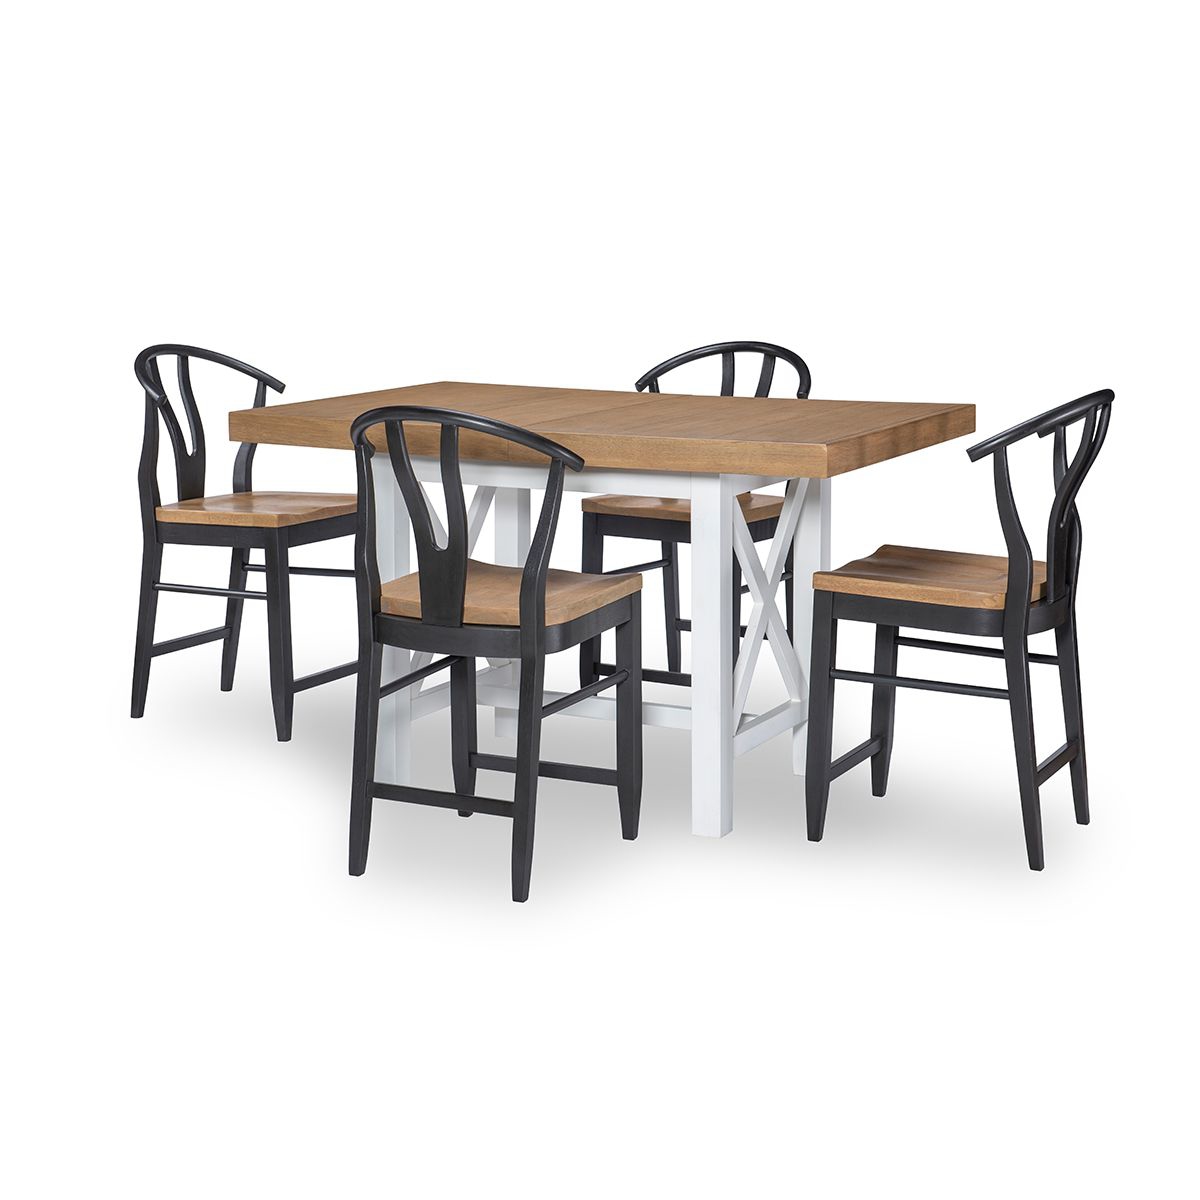 Picture of FRANKLIN COUNTER HEIGHT 5PC DINE